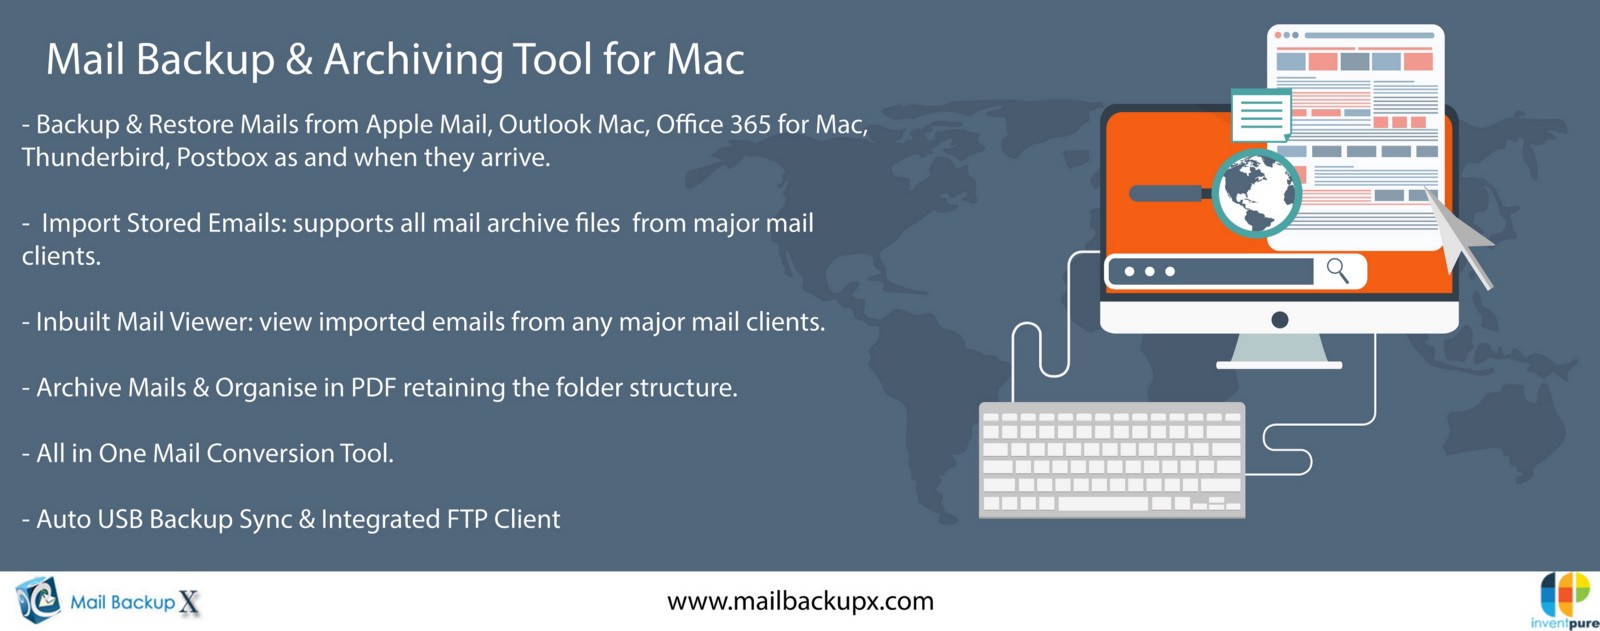 How Do I Save My Outlook For Mac Emails To An External Hard Drive